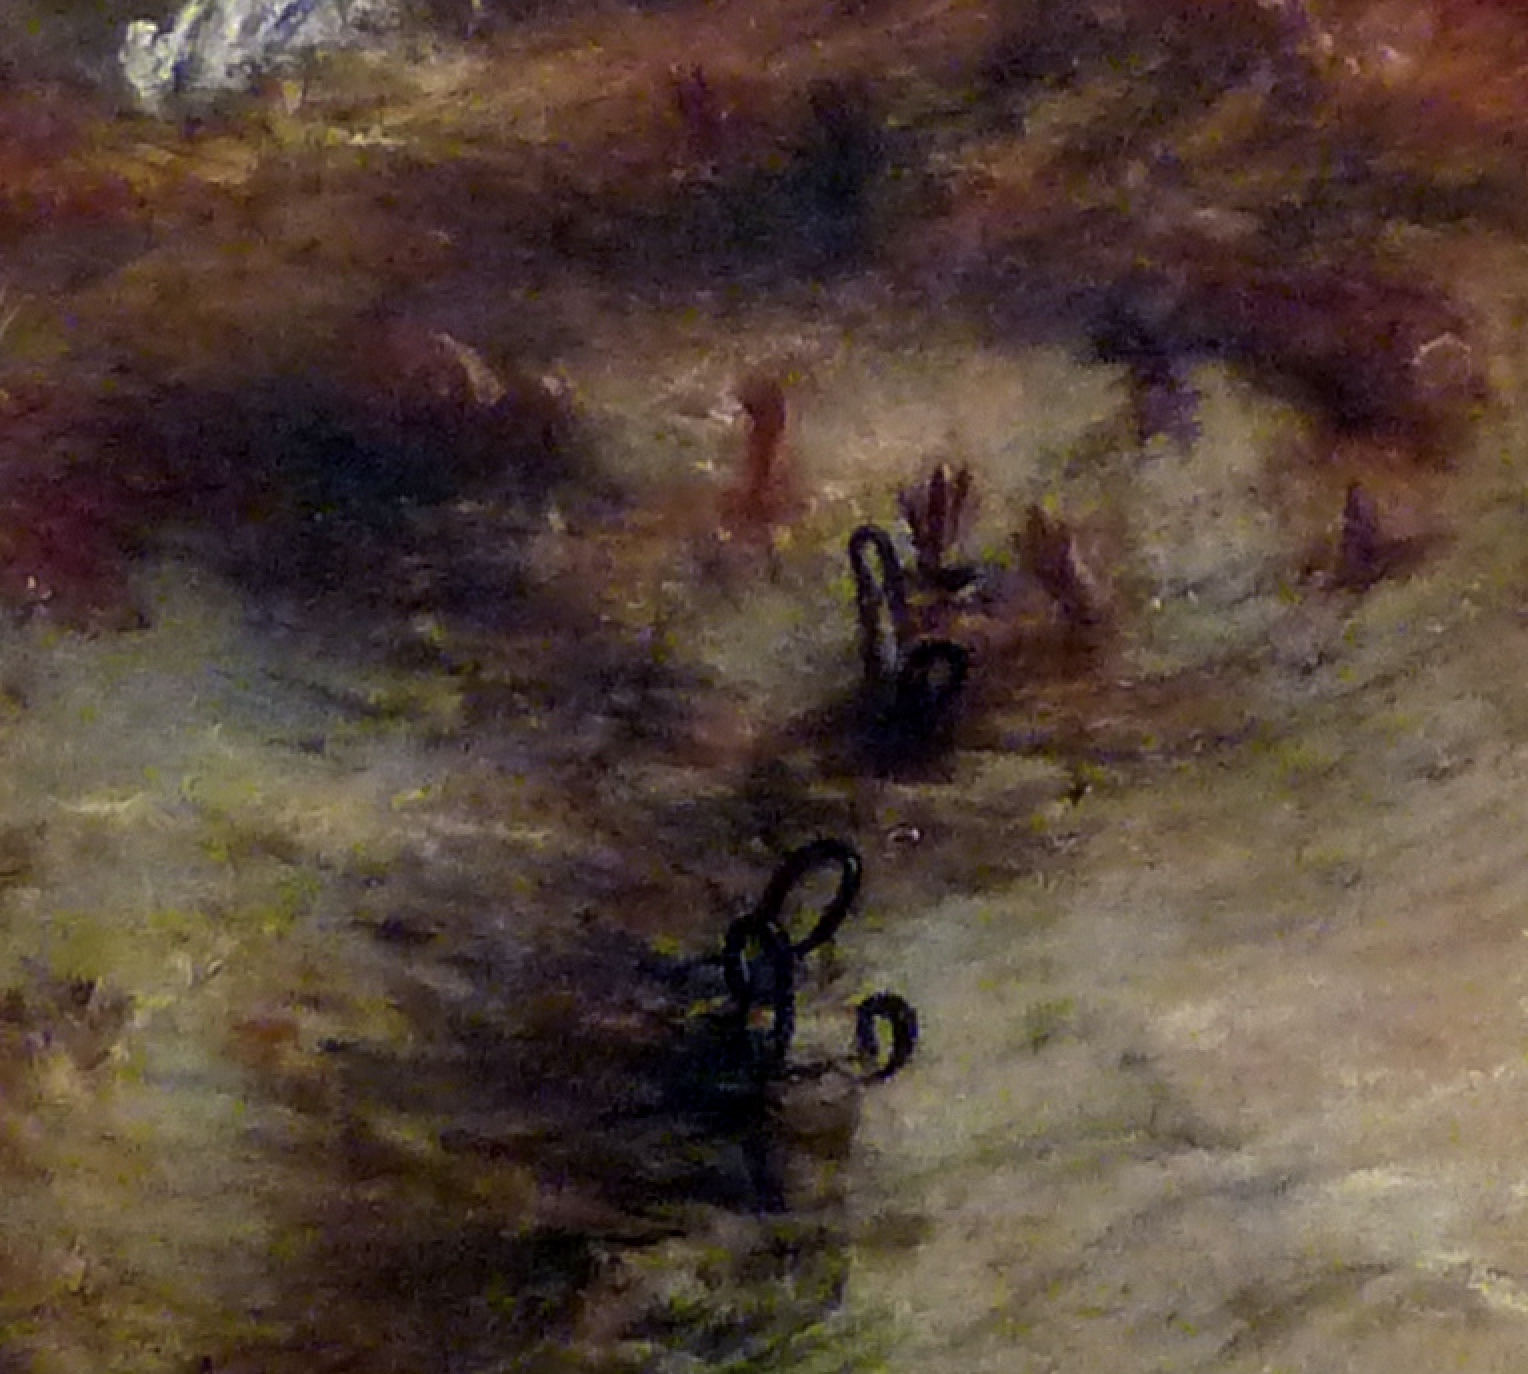 Detail, Joseph Mallord William Turner, Slavers Throwing Overboard the Dead and Dying, Typhoon Coming On (Slave Ship), oil on canvas, 1840